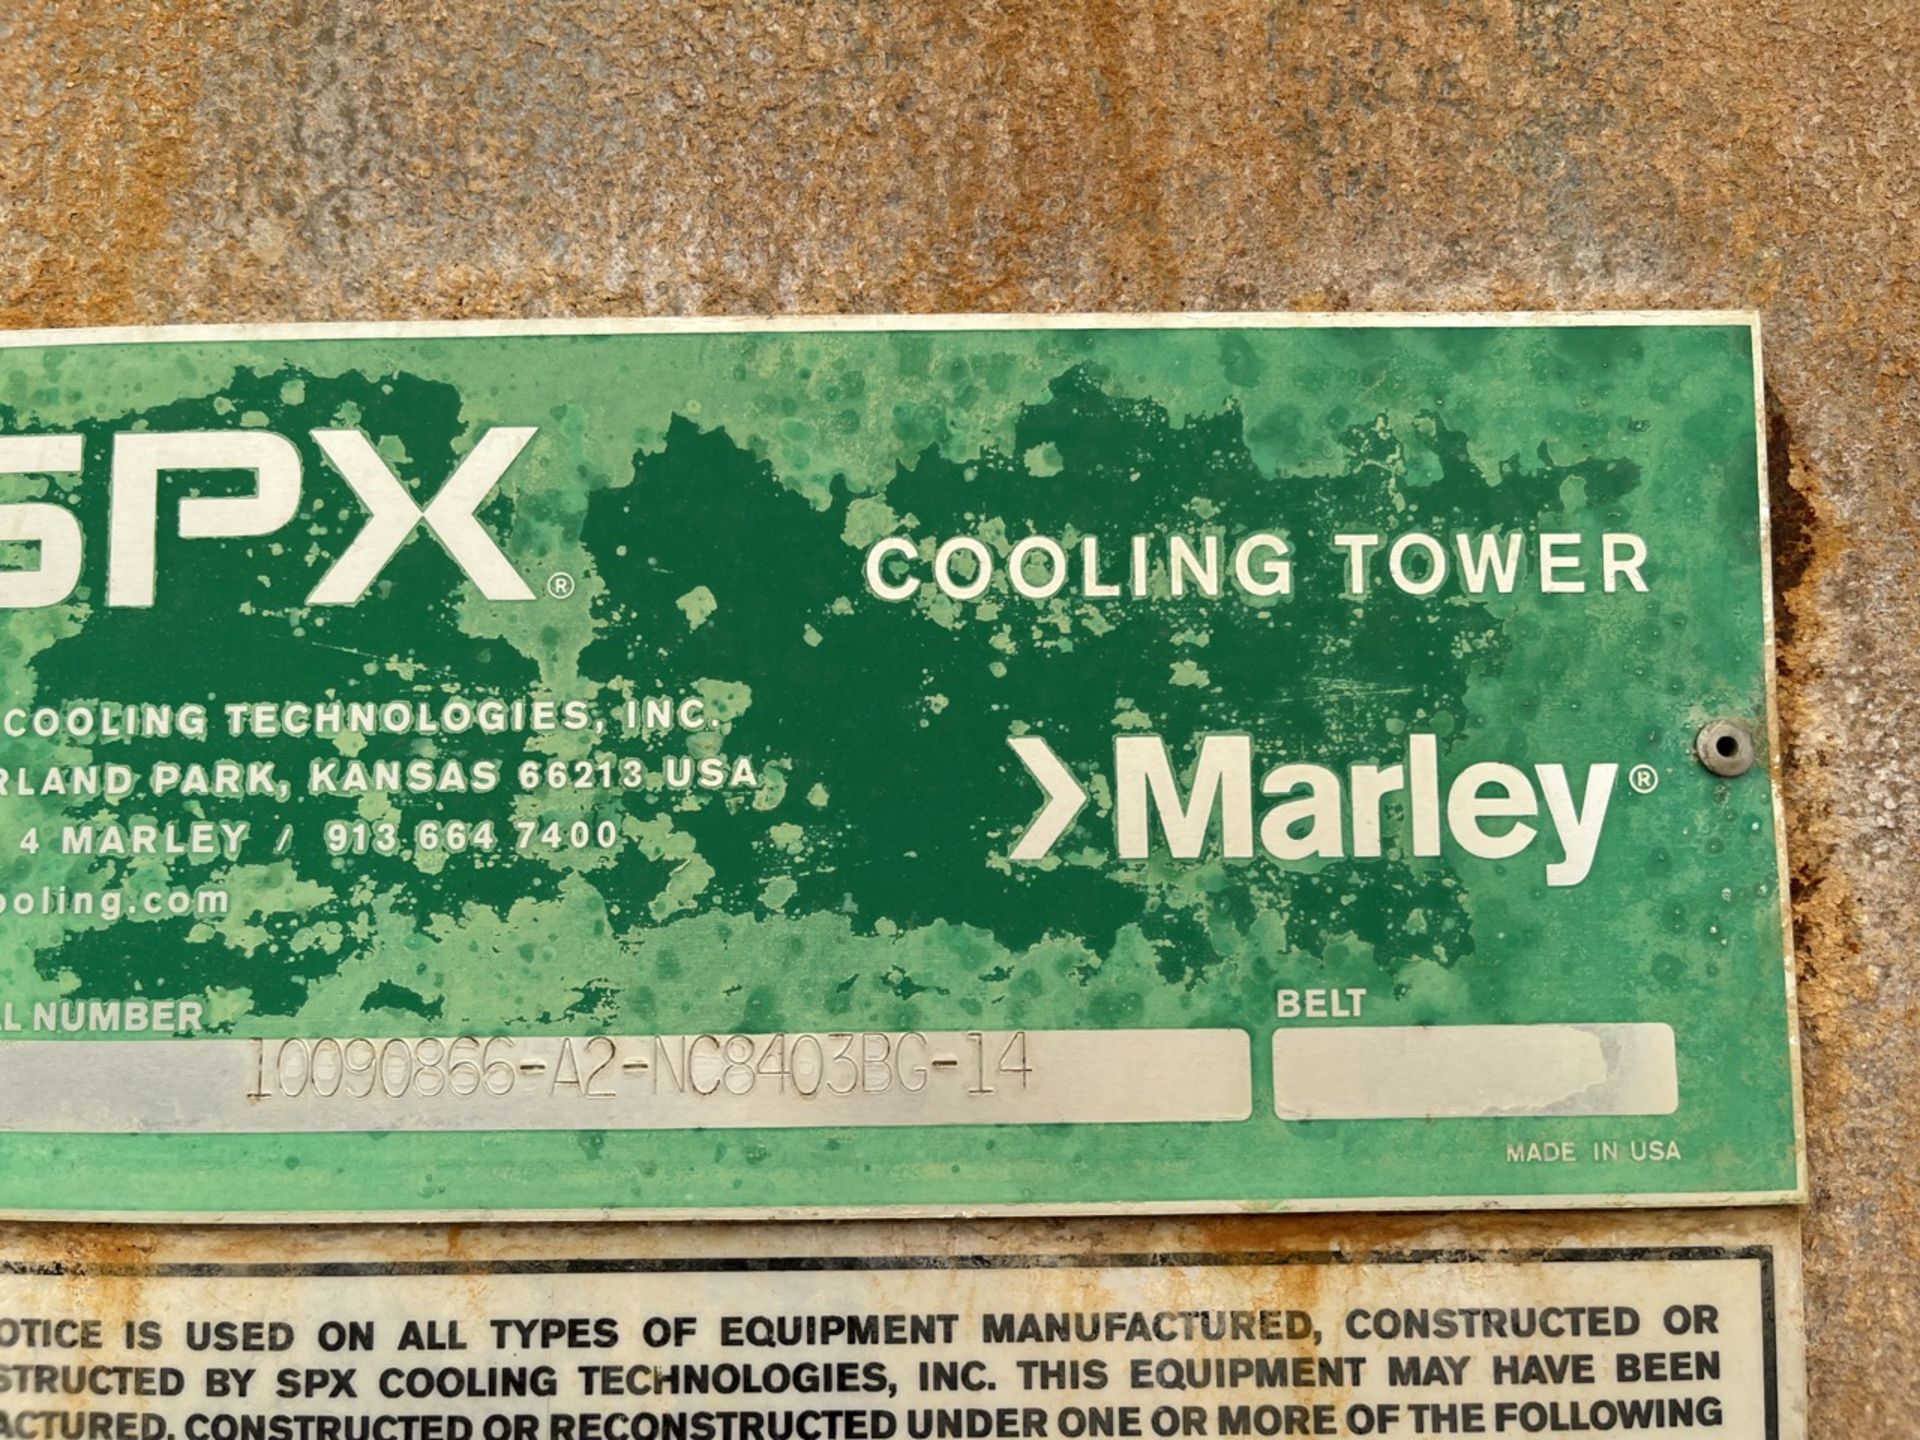 SPX Marley Cooling Tower, Model NC8403TAN2BGF, Series 10090866-A2-NC8403BG-14, Year 2009; 1 cell 25 - Image 18 of 23